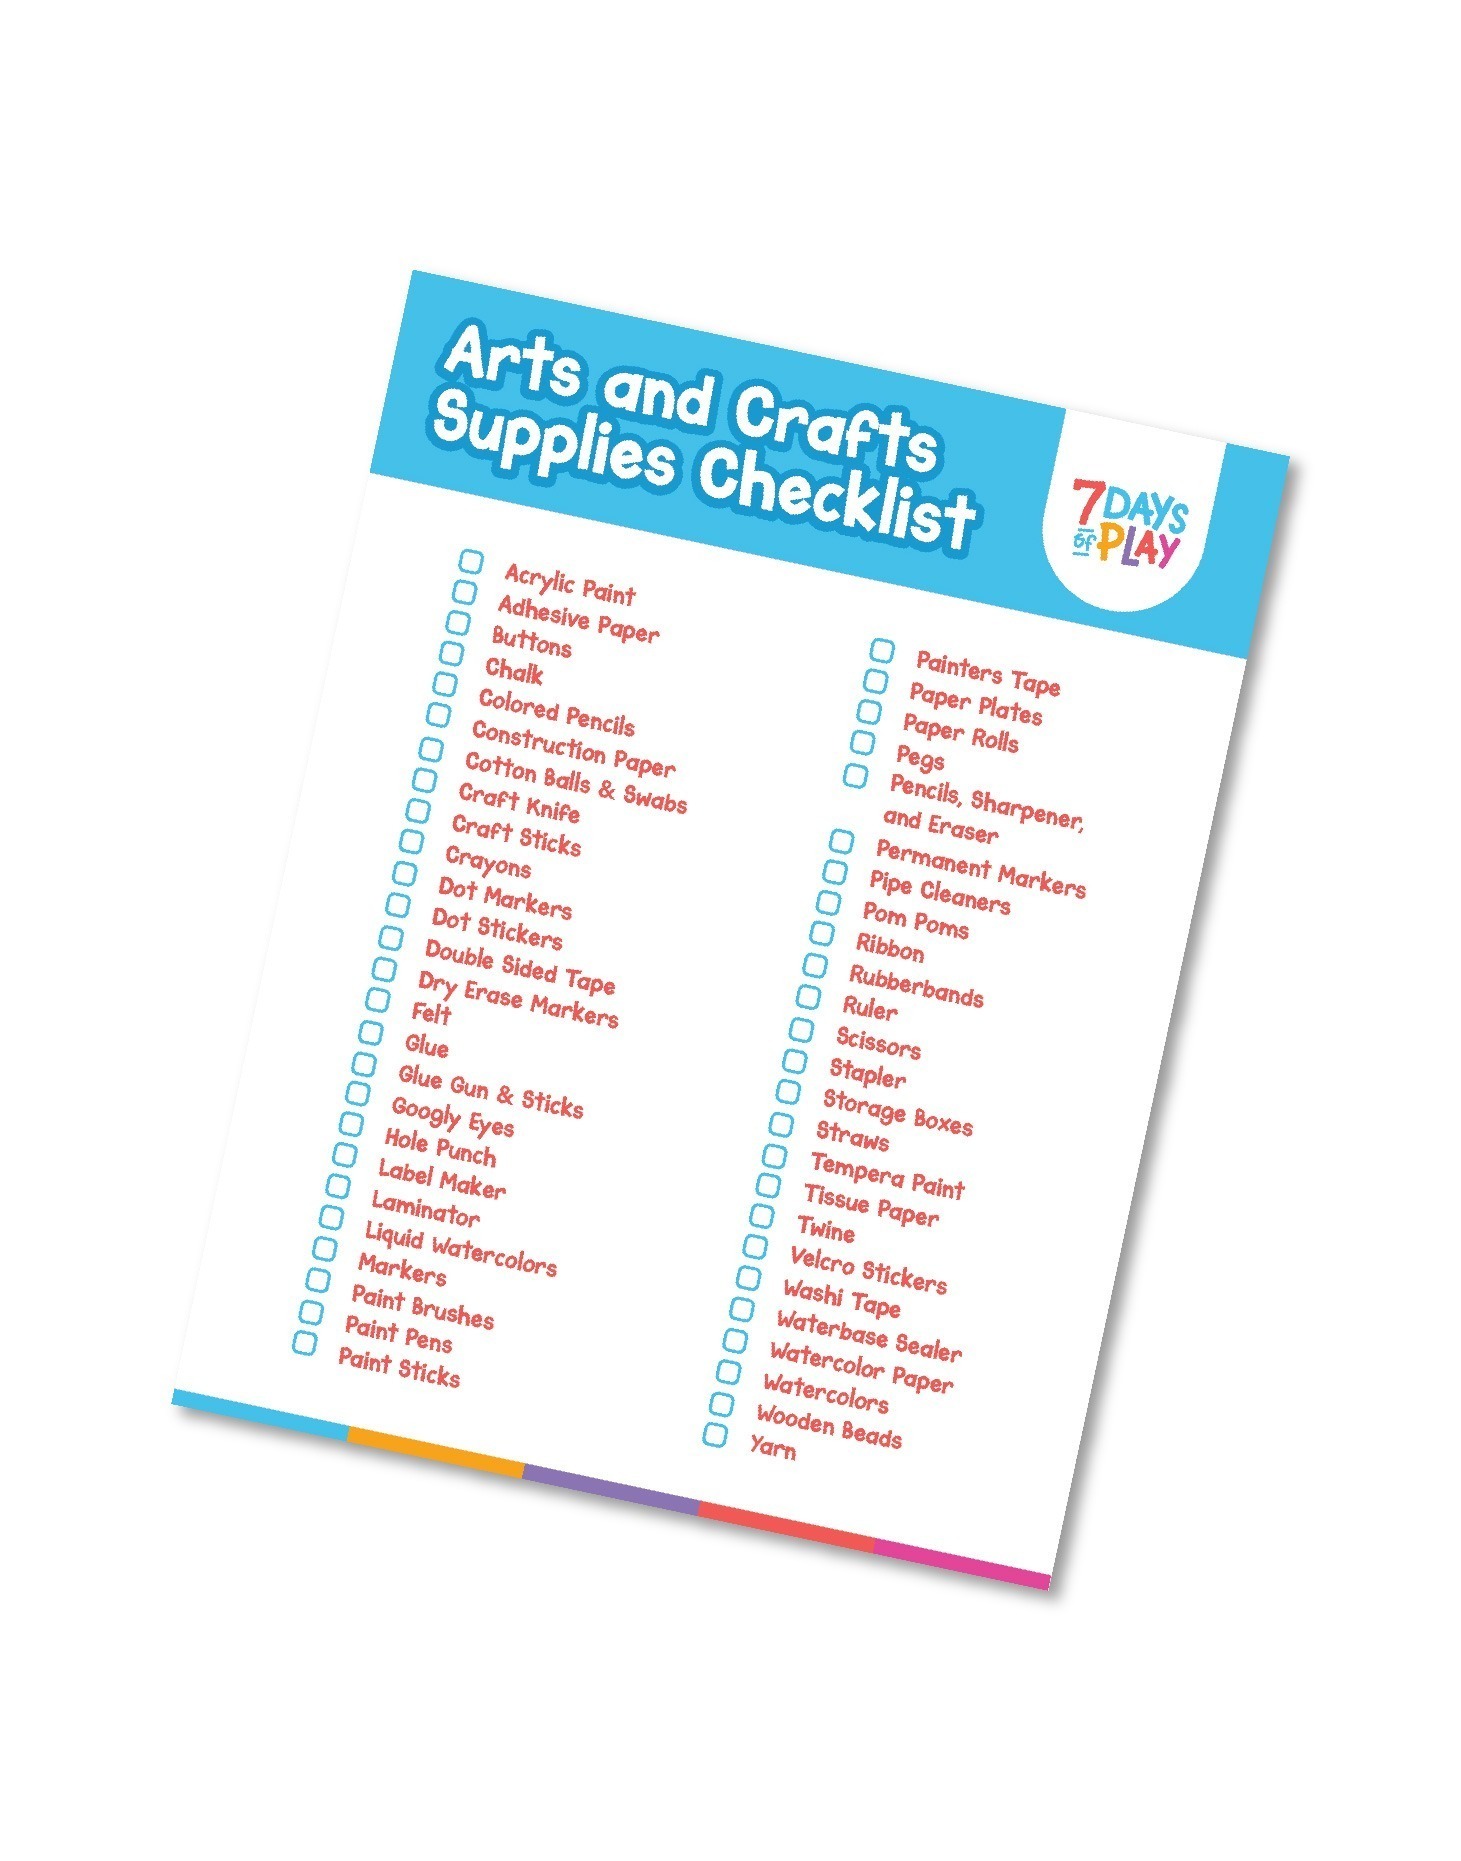 Art and Craft Supply Checklist - Printable - 7 Days of Play